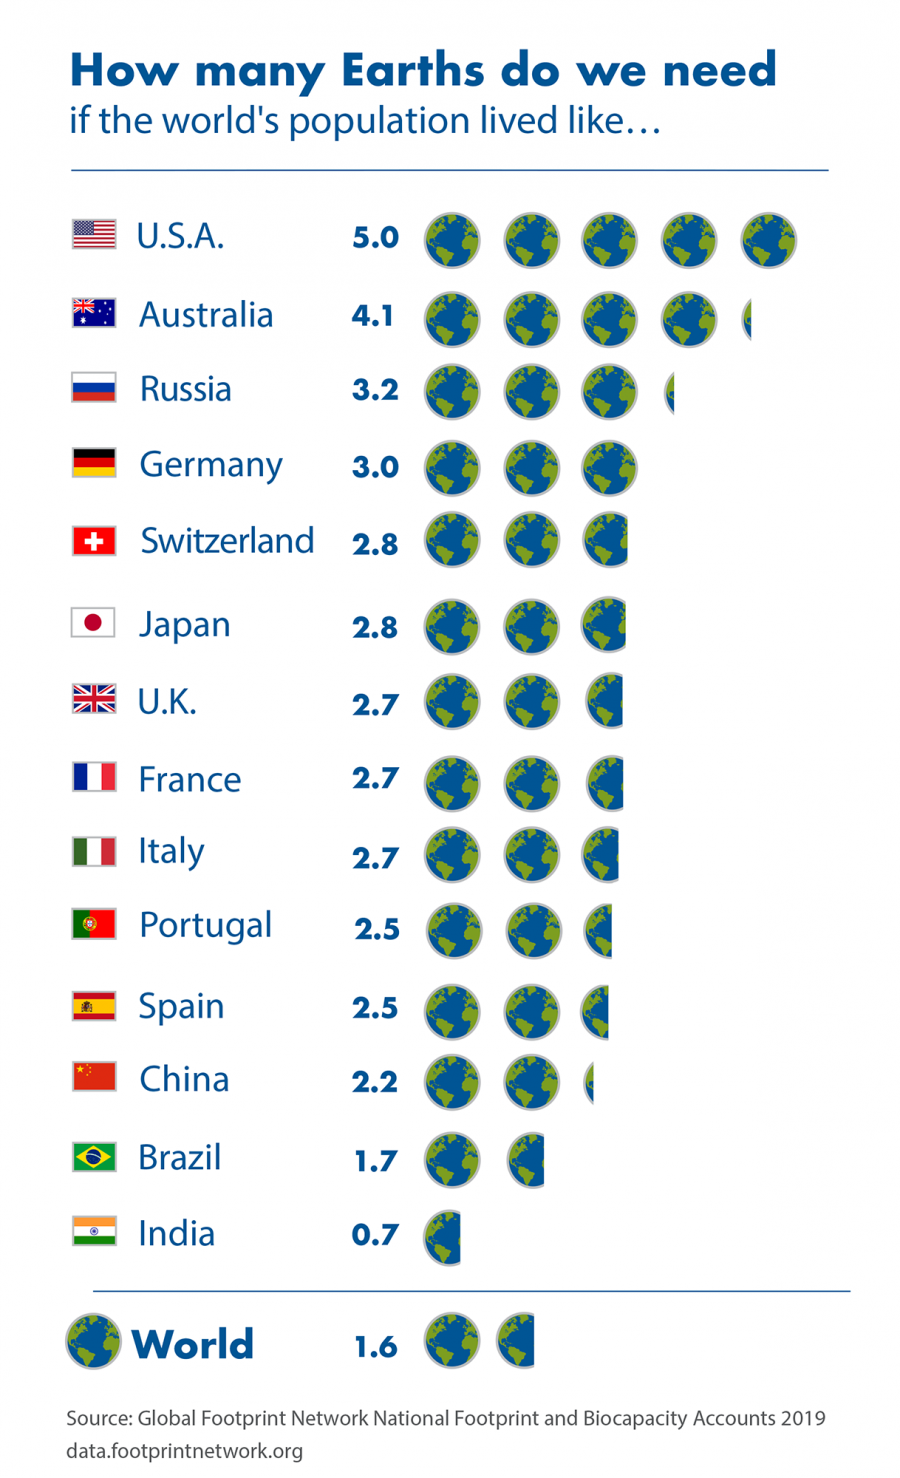 If the world's population lived like the US, we would need 5 Earths! On the other end of the chart is India with only 0.7 Earths necessary to sustain their lifestyle. 